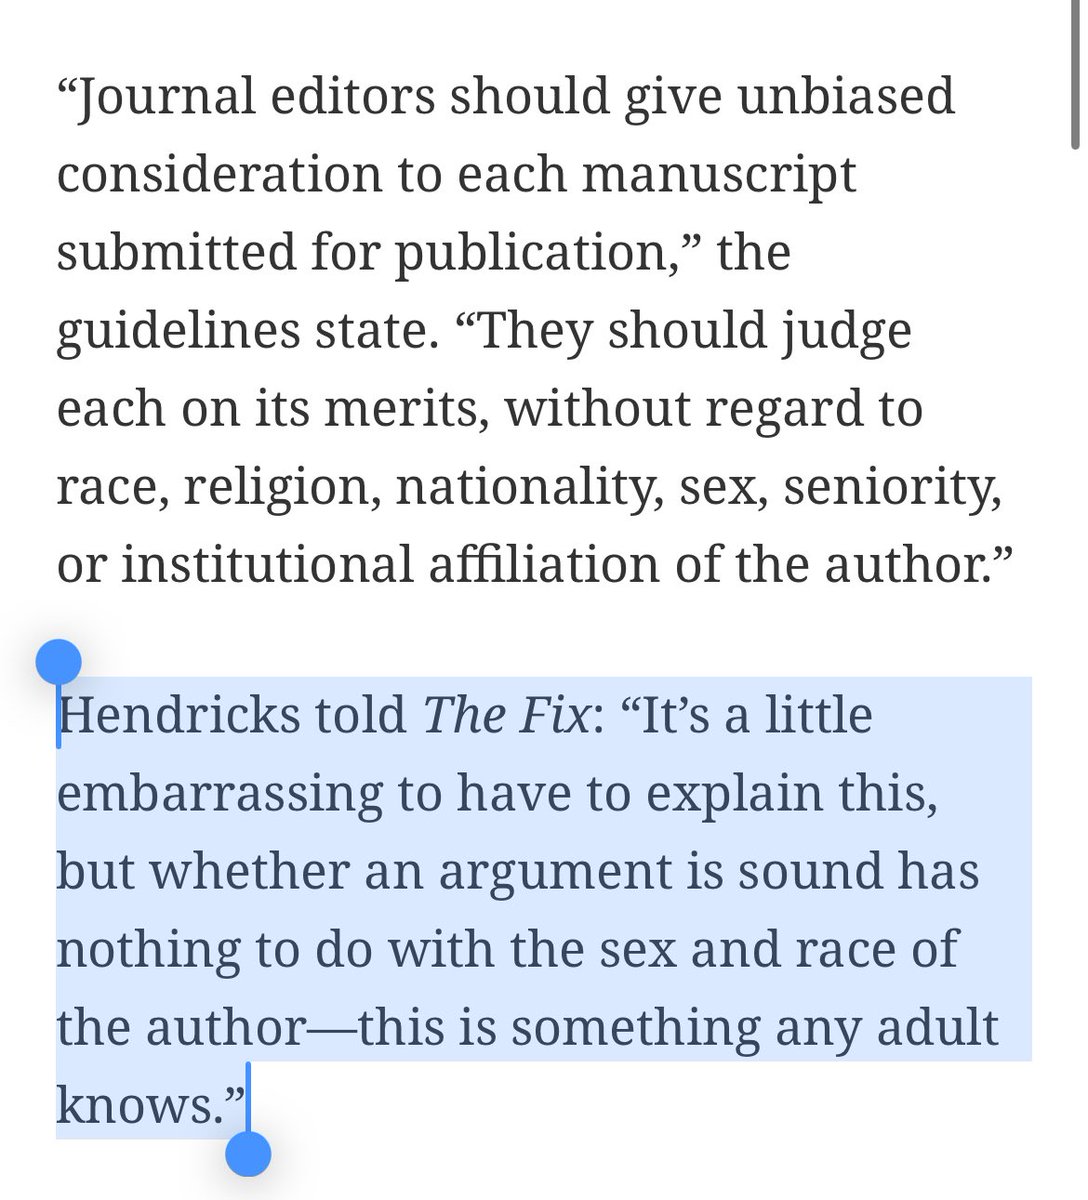 More on the bioethics journal that let an online mob overrule the peer review process and its editor who cited the author’s race and sex as a reason to reject a paper that had already been accepted.